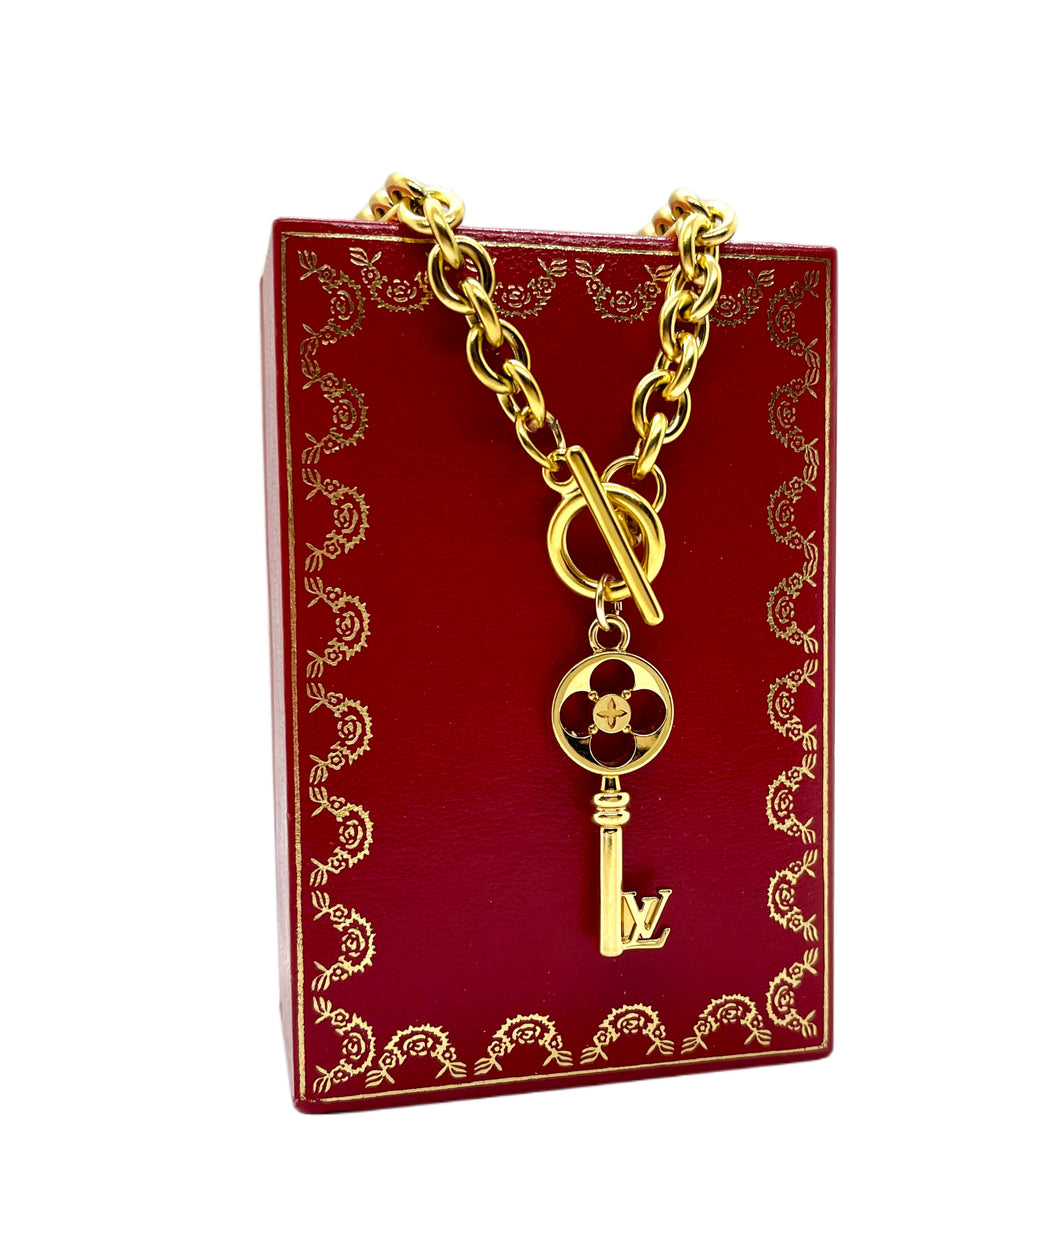 Vintage Reworked Louis Vuitton Charm Keychain All Gold Gems on LV